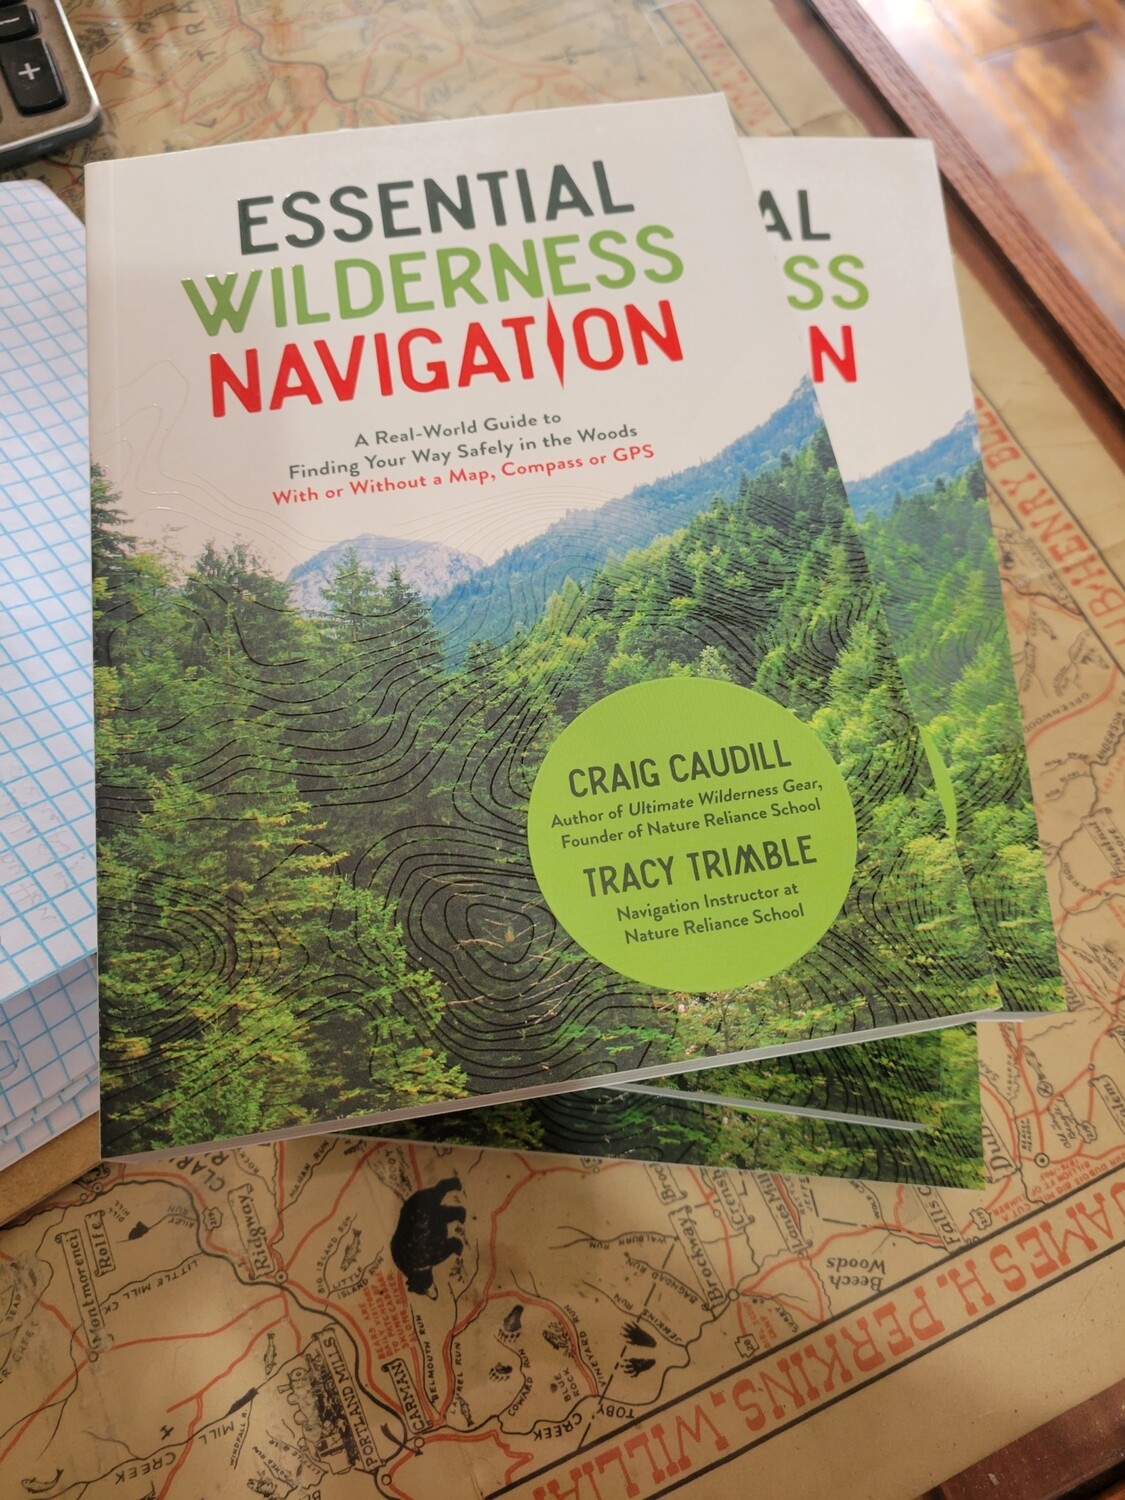 Essential Wilderness Navigation by Craig Caudill & Tracy Trimble